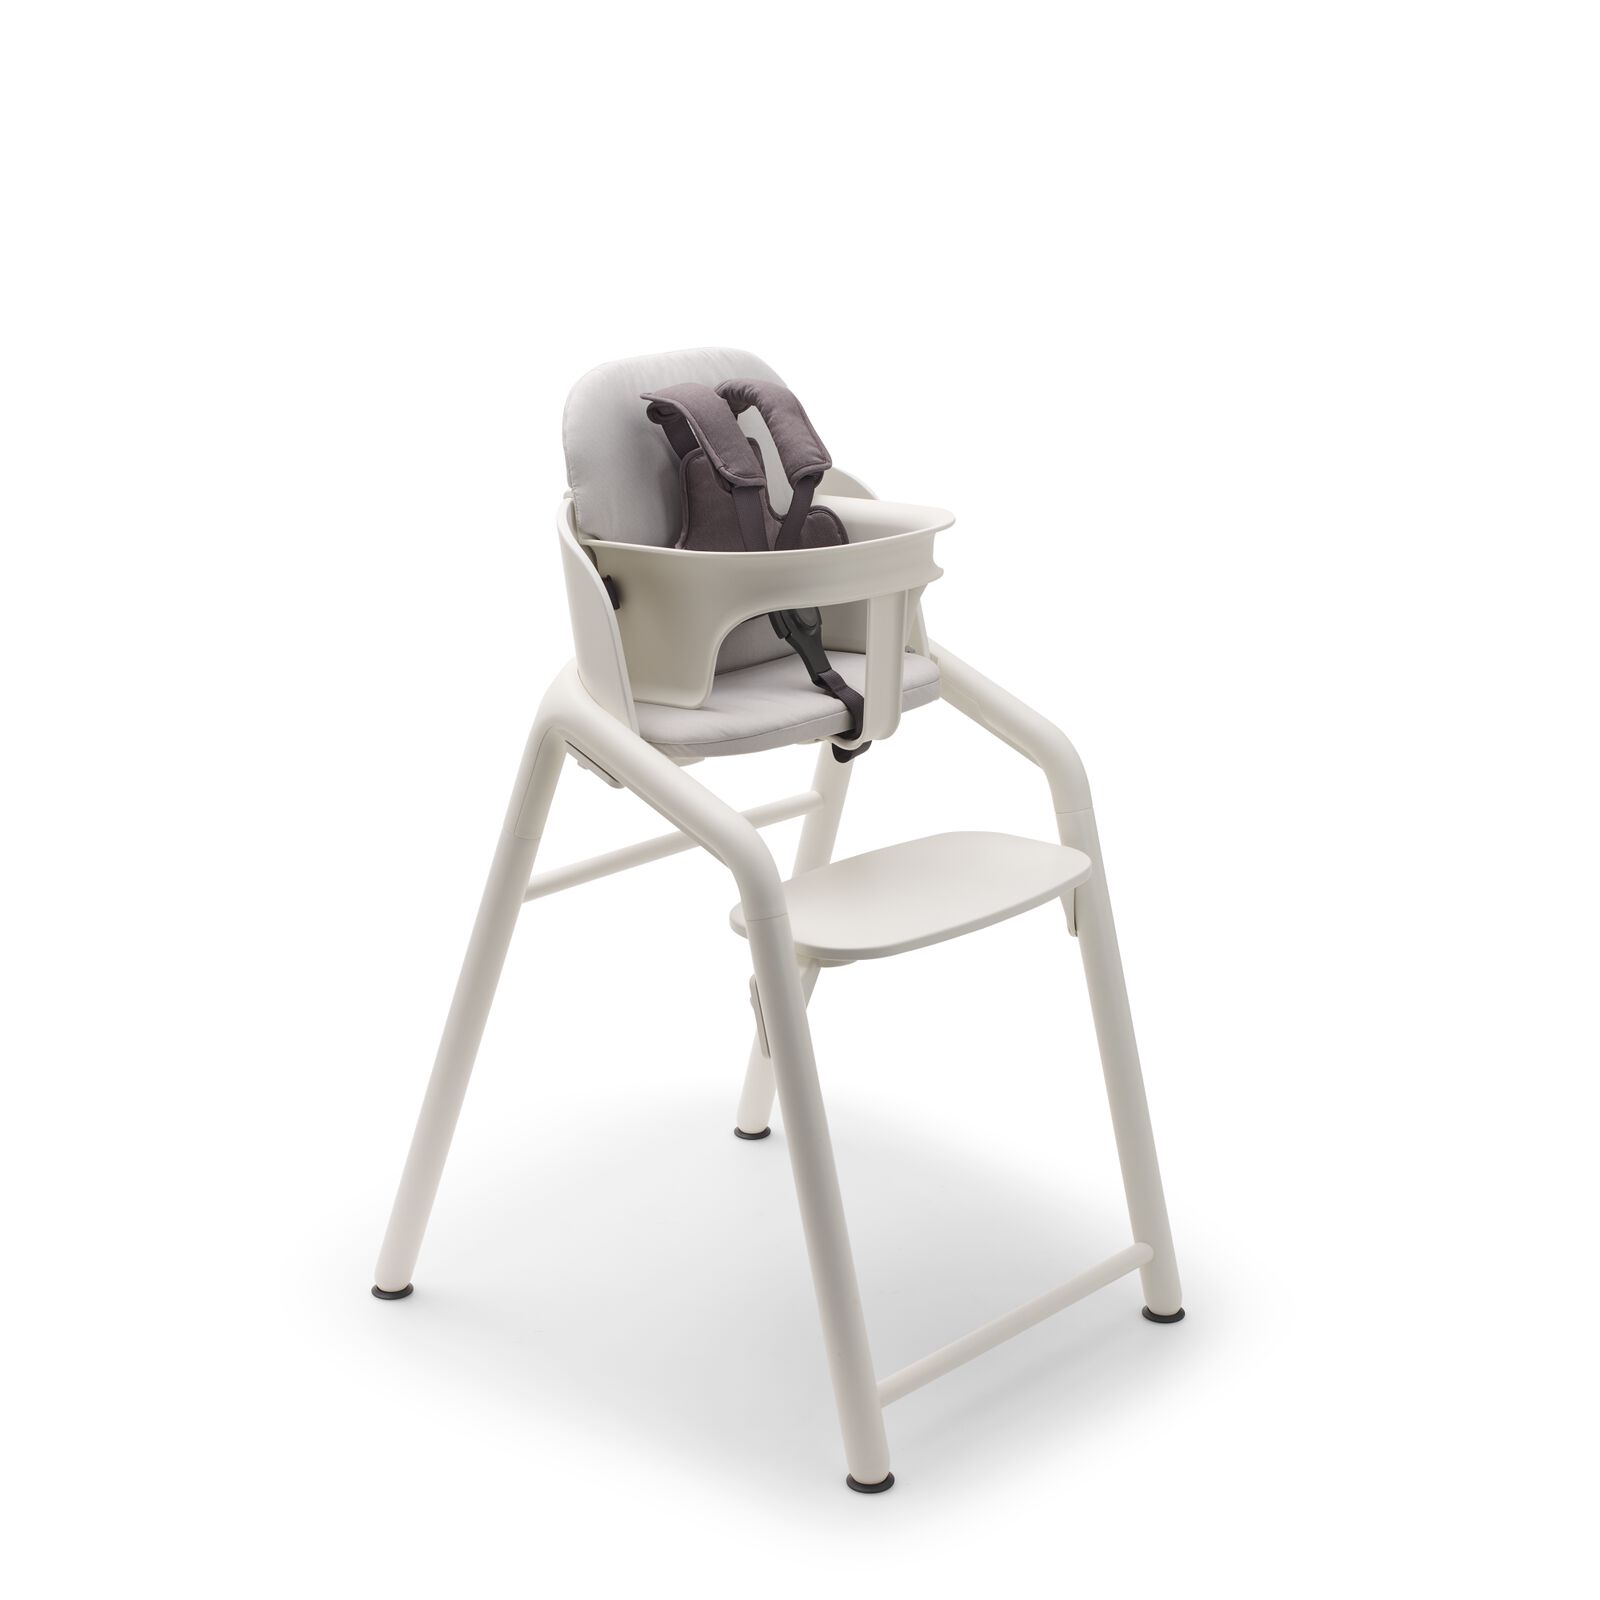 Bugaboo Giraffe chair, baby set with harness, and baby pillow set, all in white.